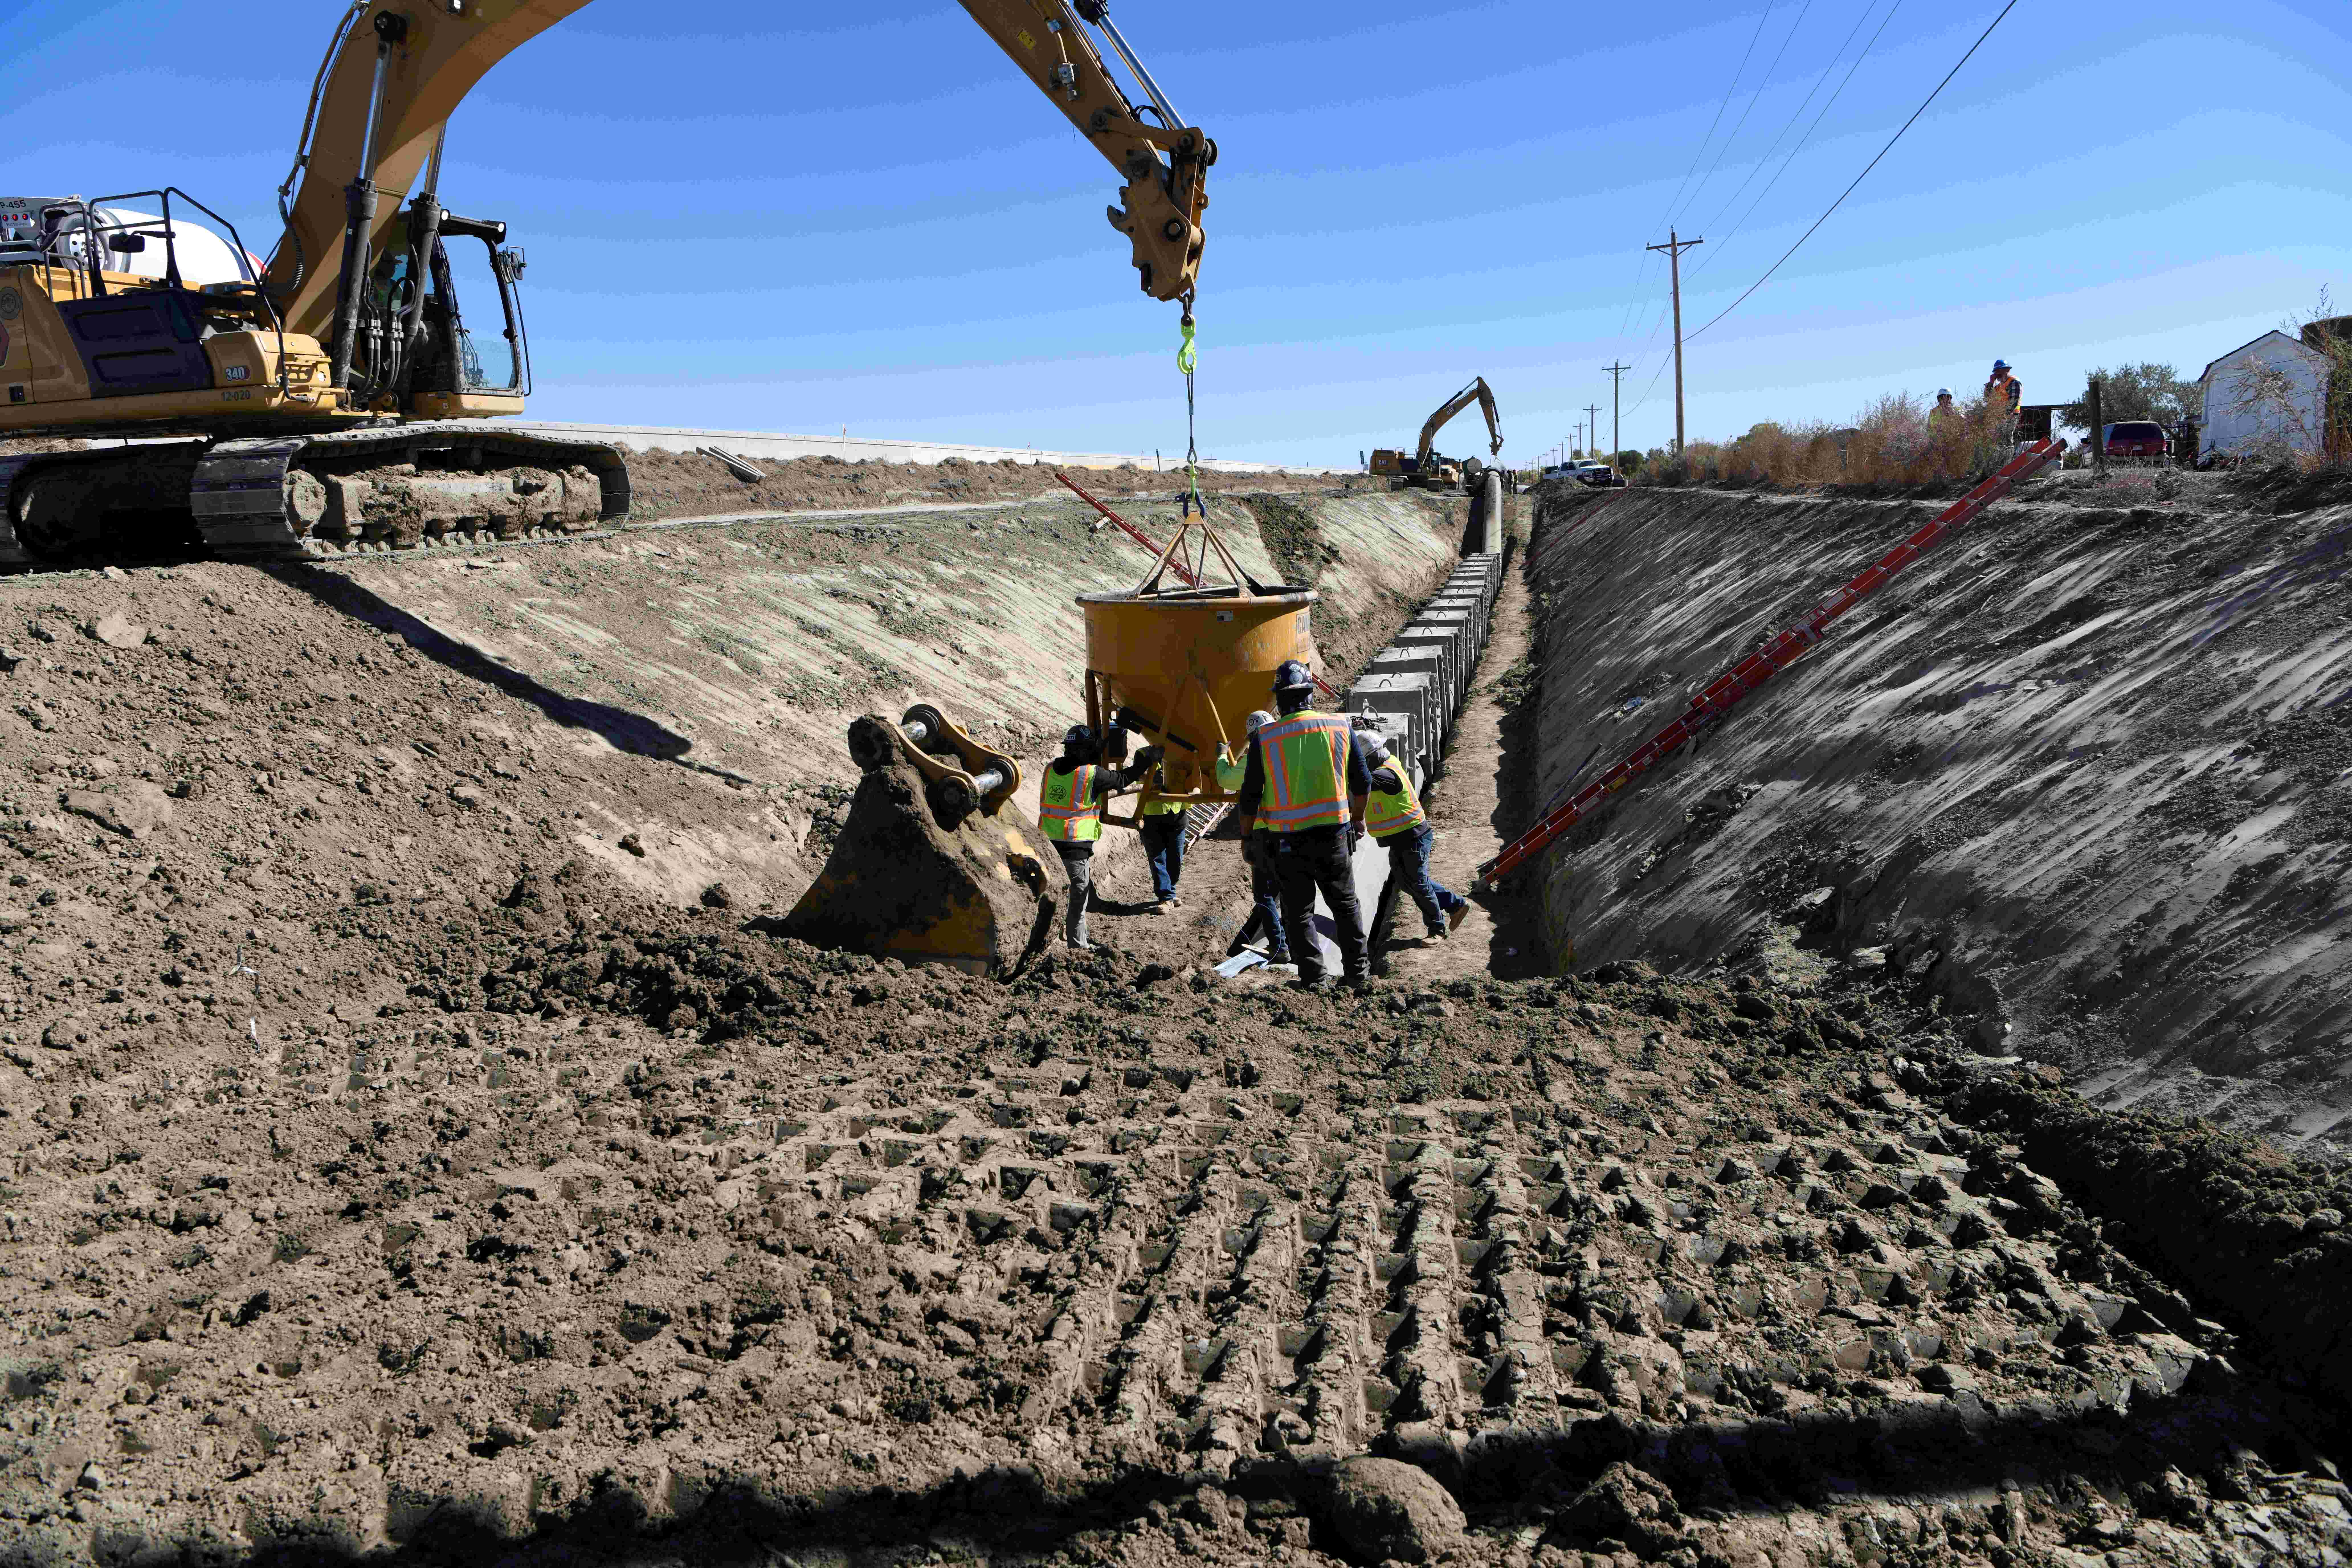 People working in a trench installing pipe. An excavator is lowering a manifold down into the trench.